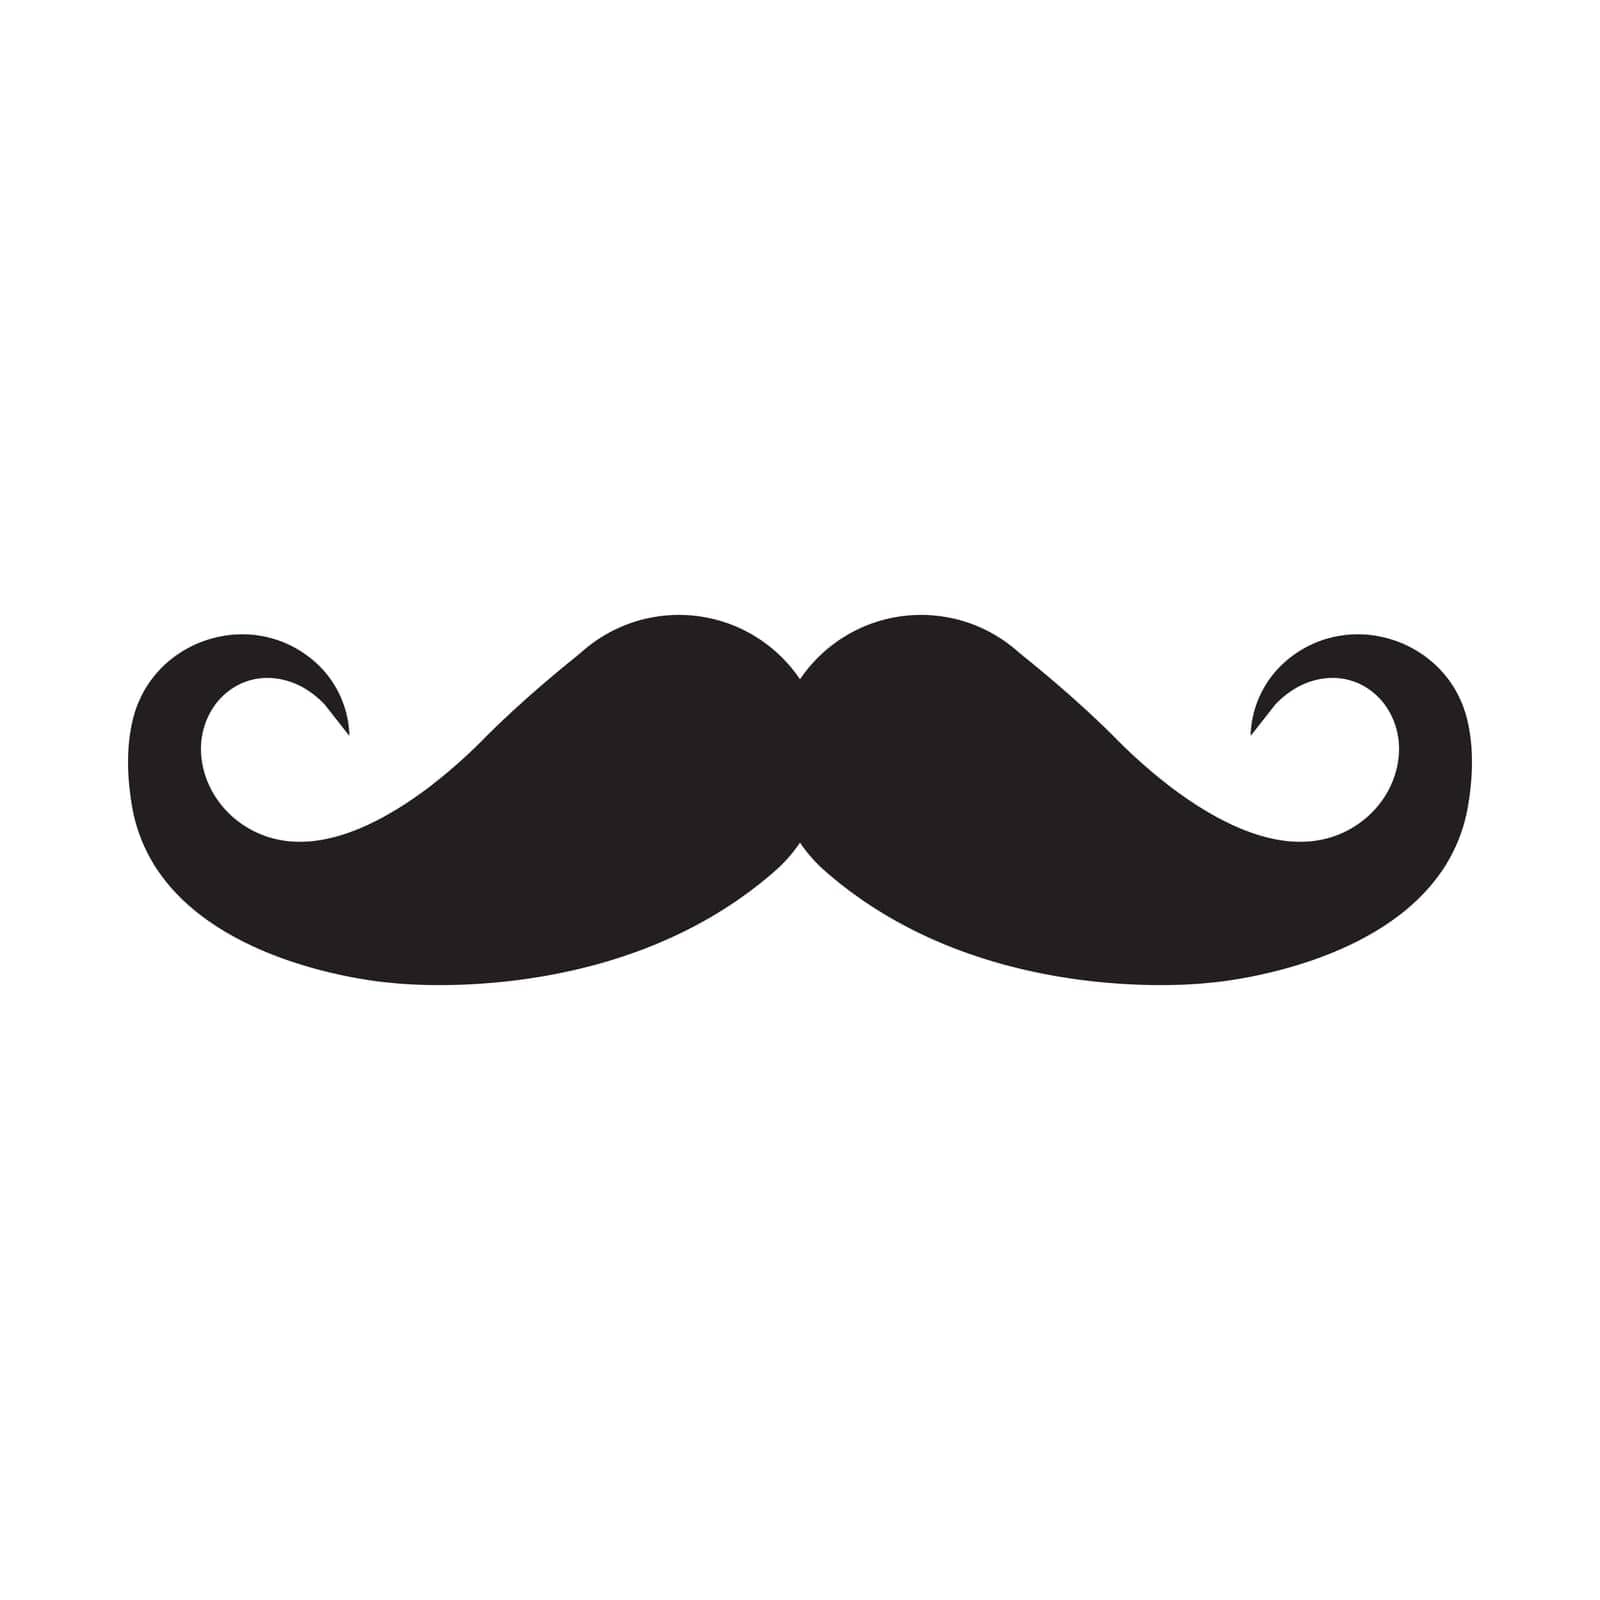 Mustache vector icon by rnking